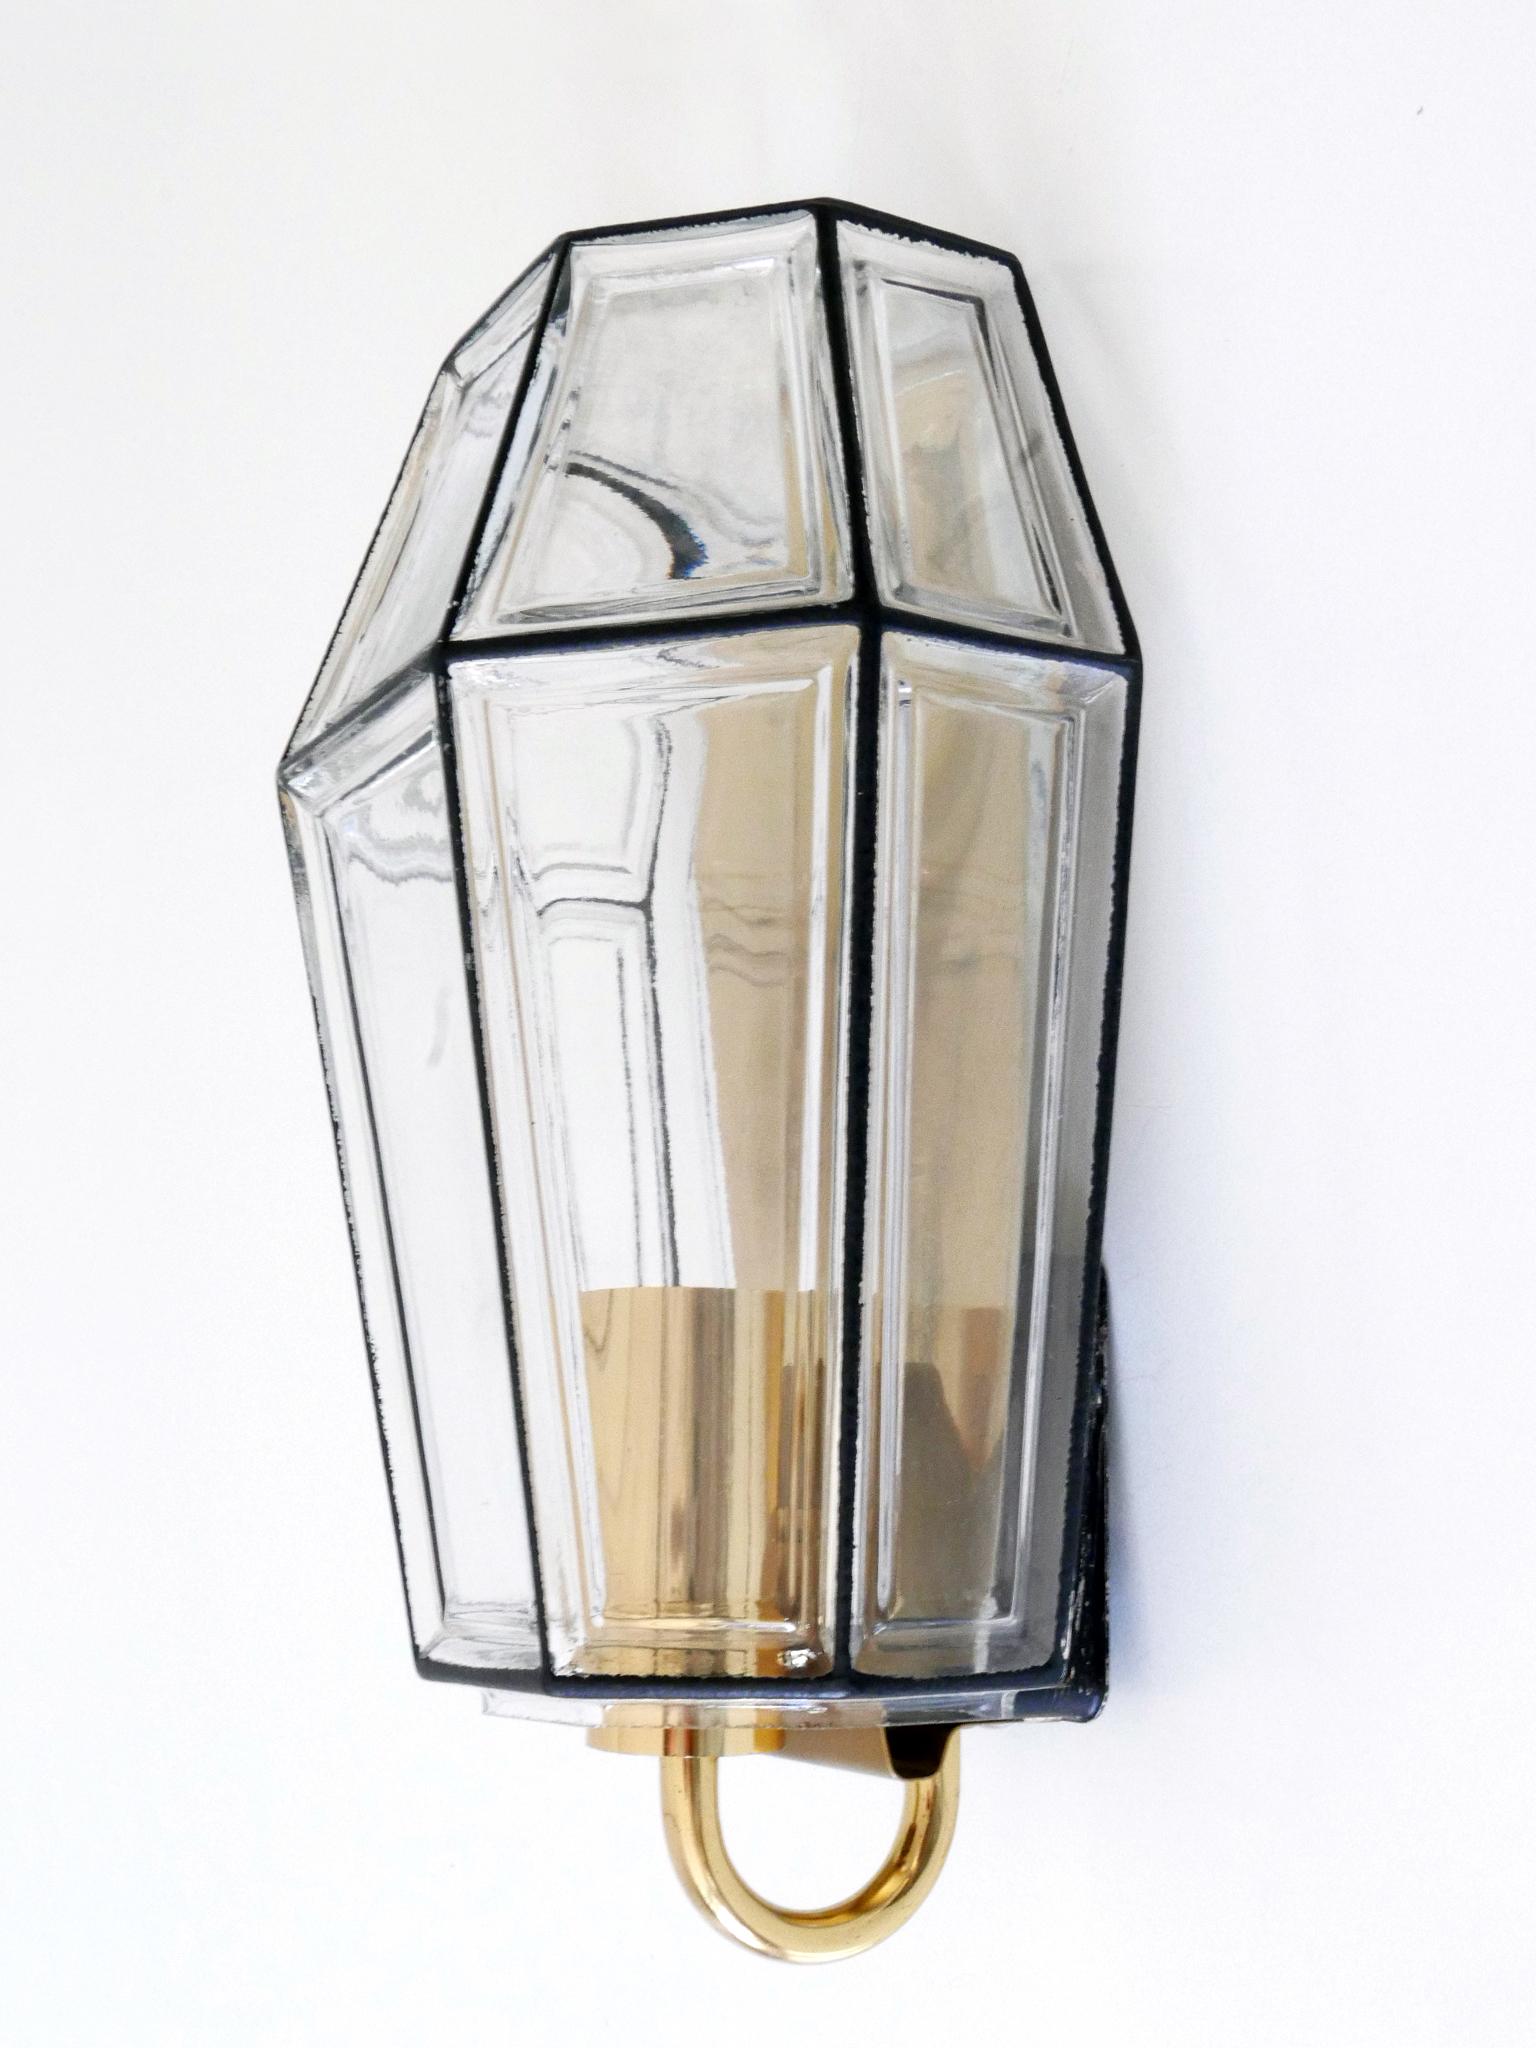 Set of Two Mid-Century Modern Sconces or Wall Fixtures by Glashütte Limburg For Sale 9